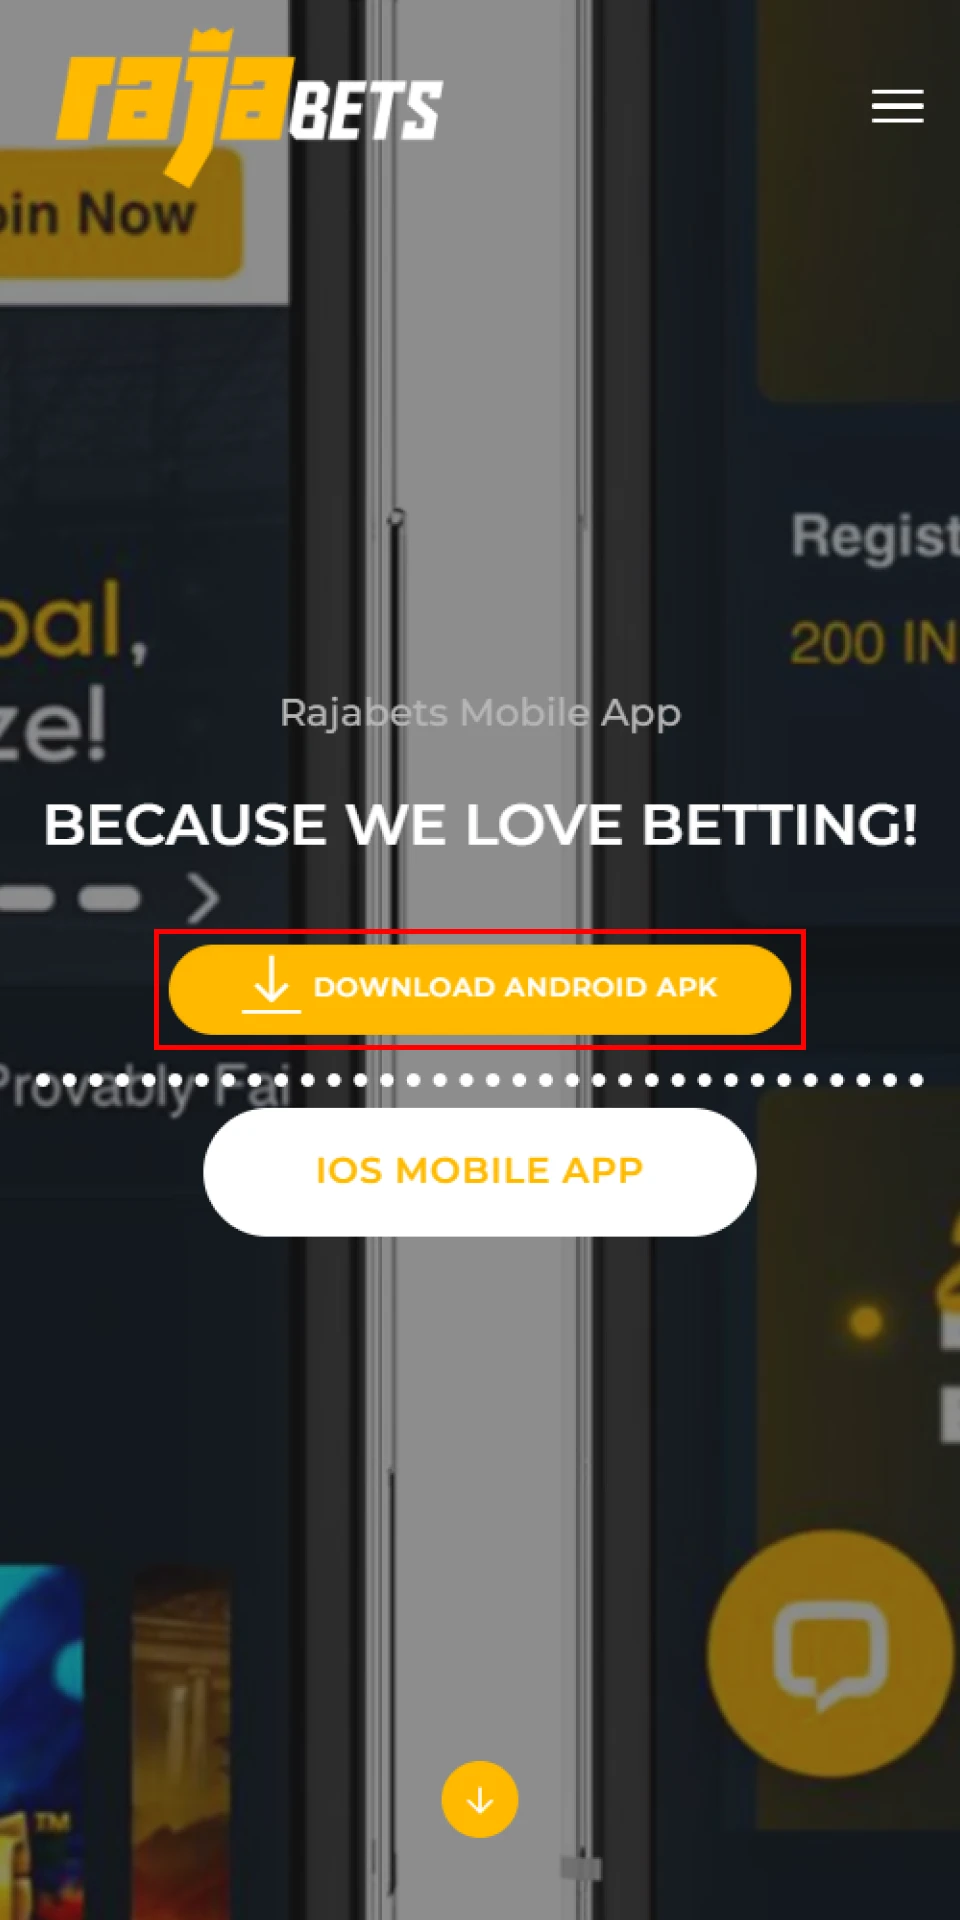 On the Rajabets website, find the download app section and download the Rajabets APK file.